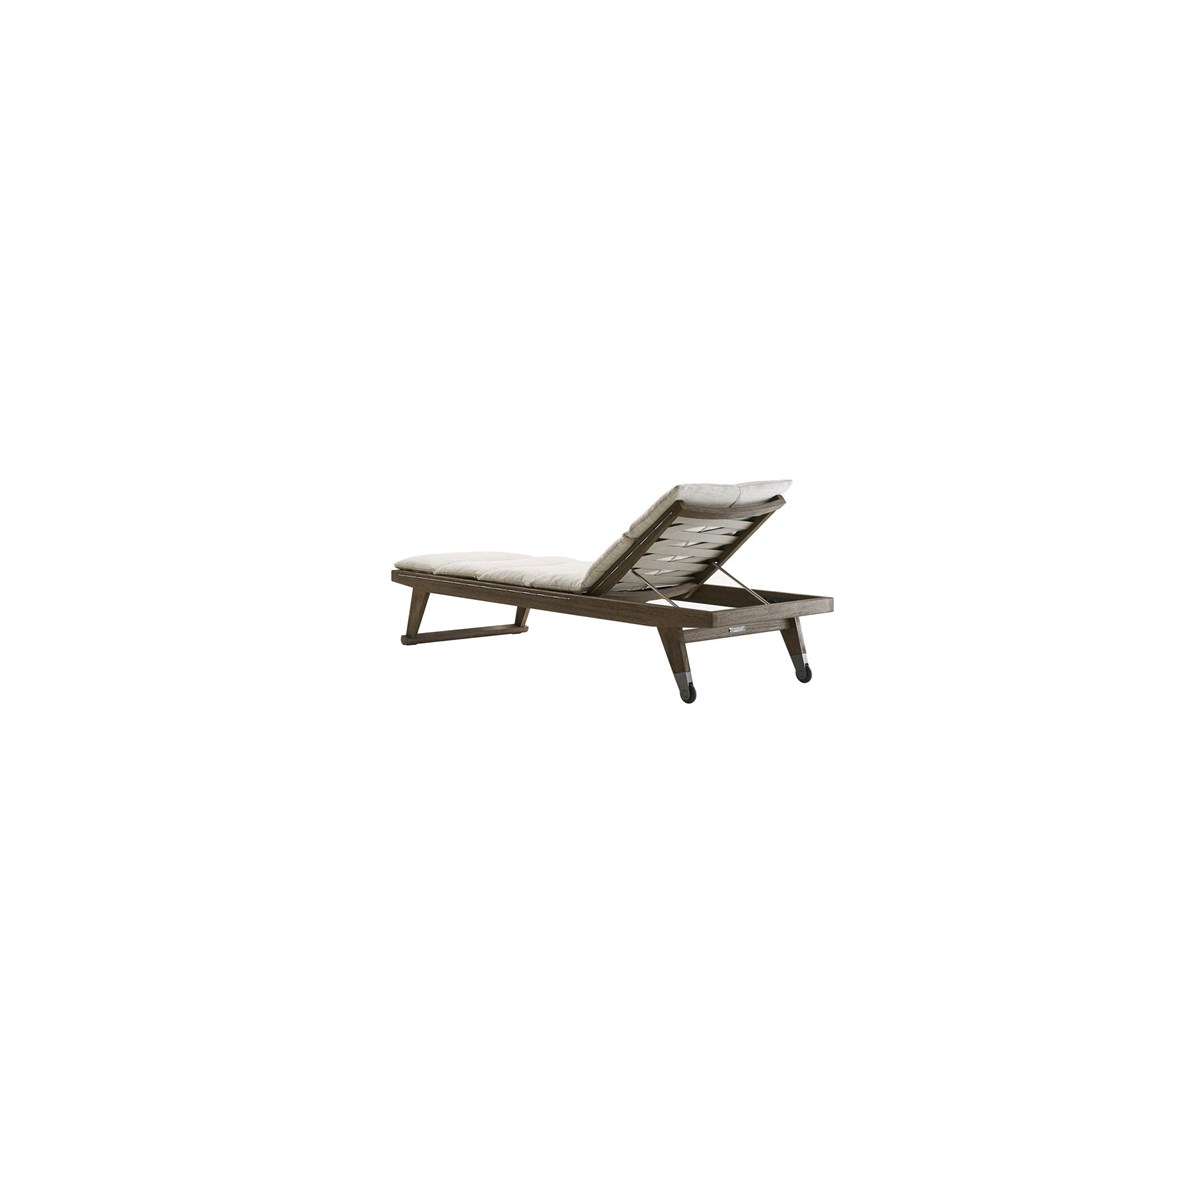 Thisslider 1 53118 Outdoor Chaise Longue Gio 02 1 1